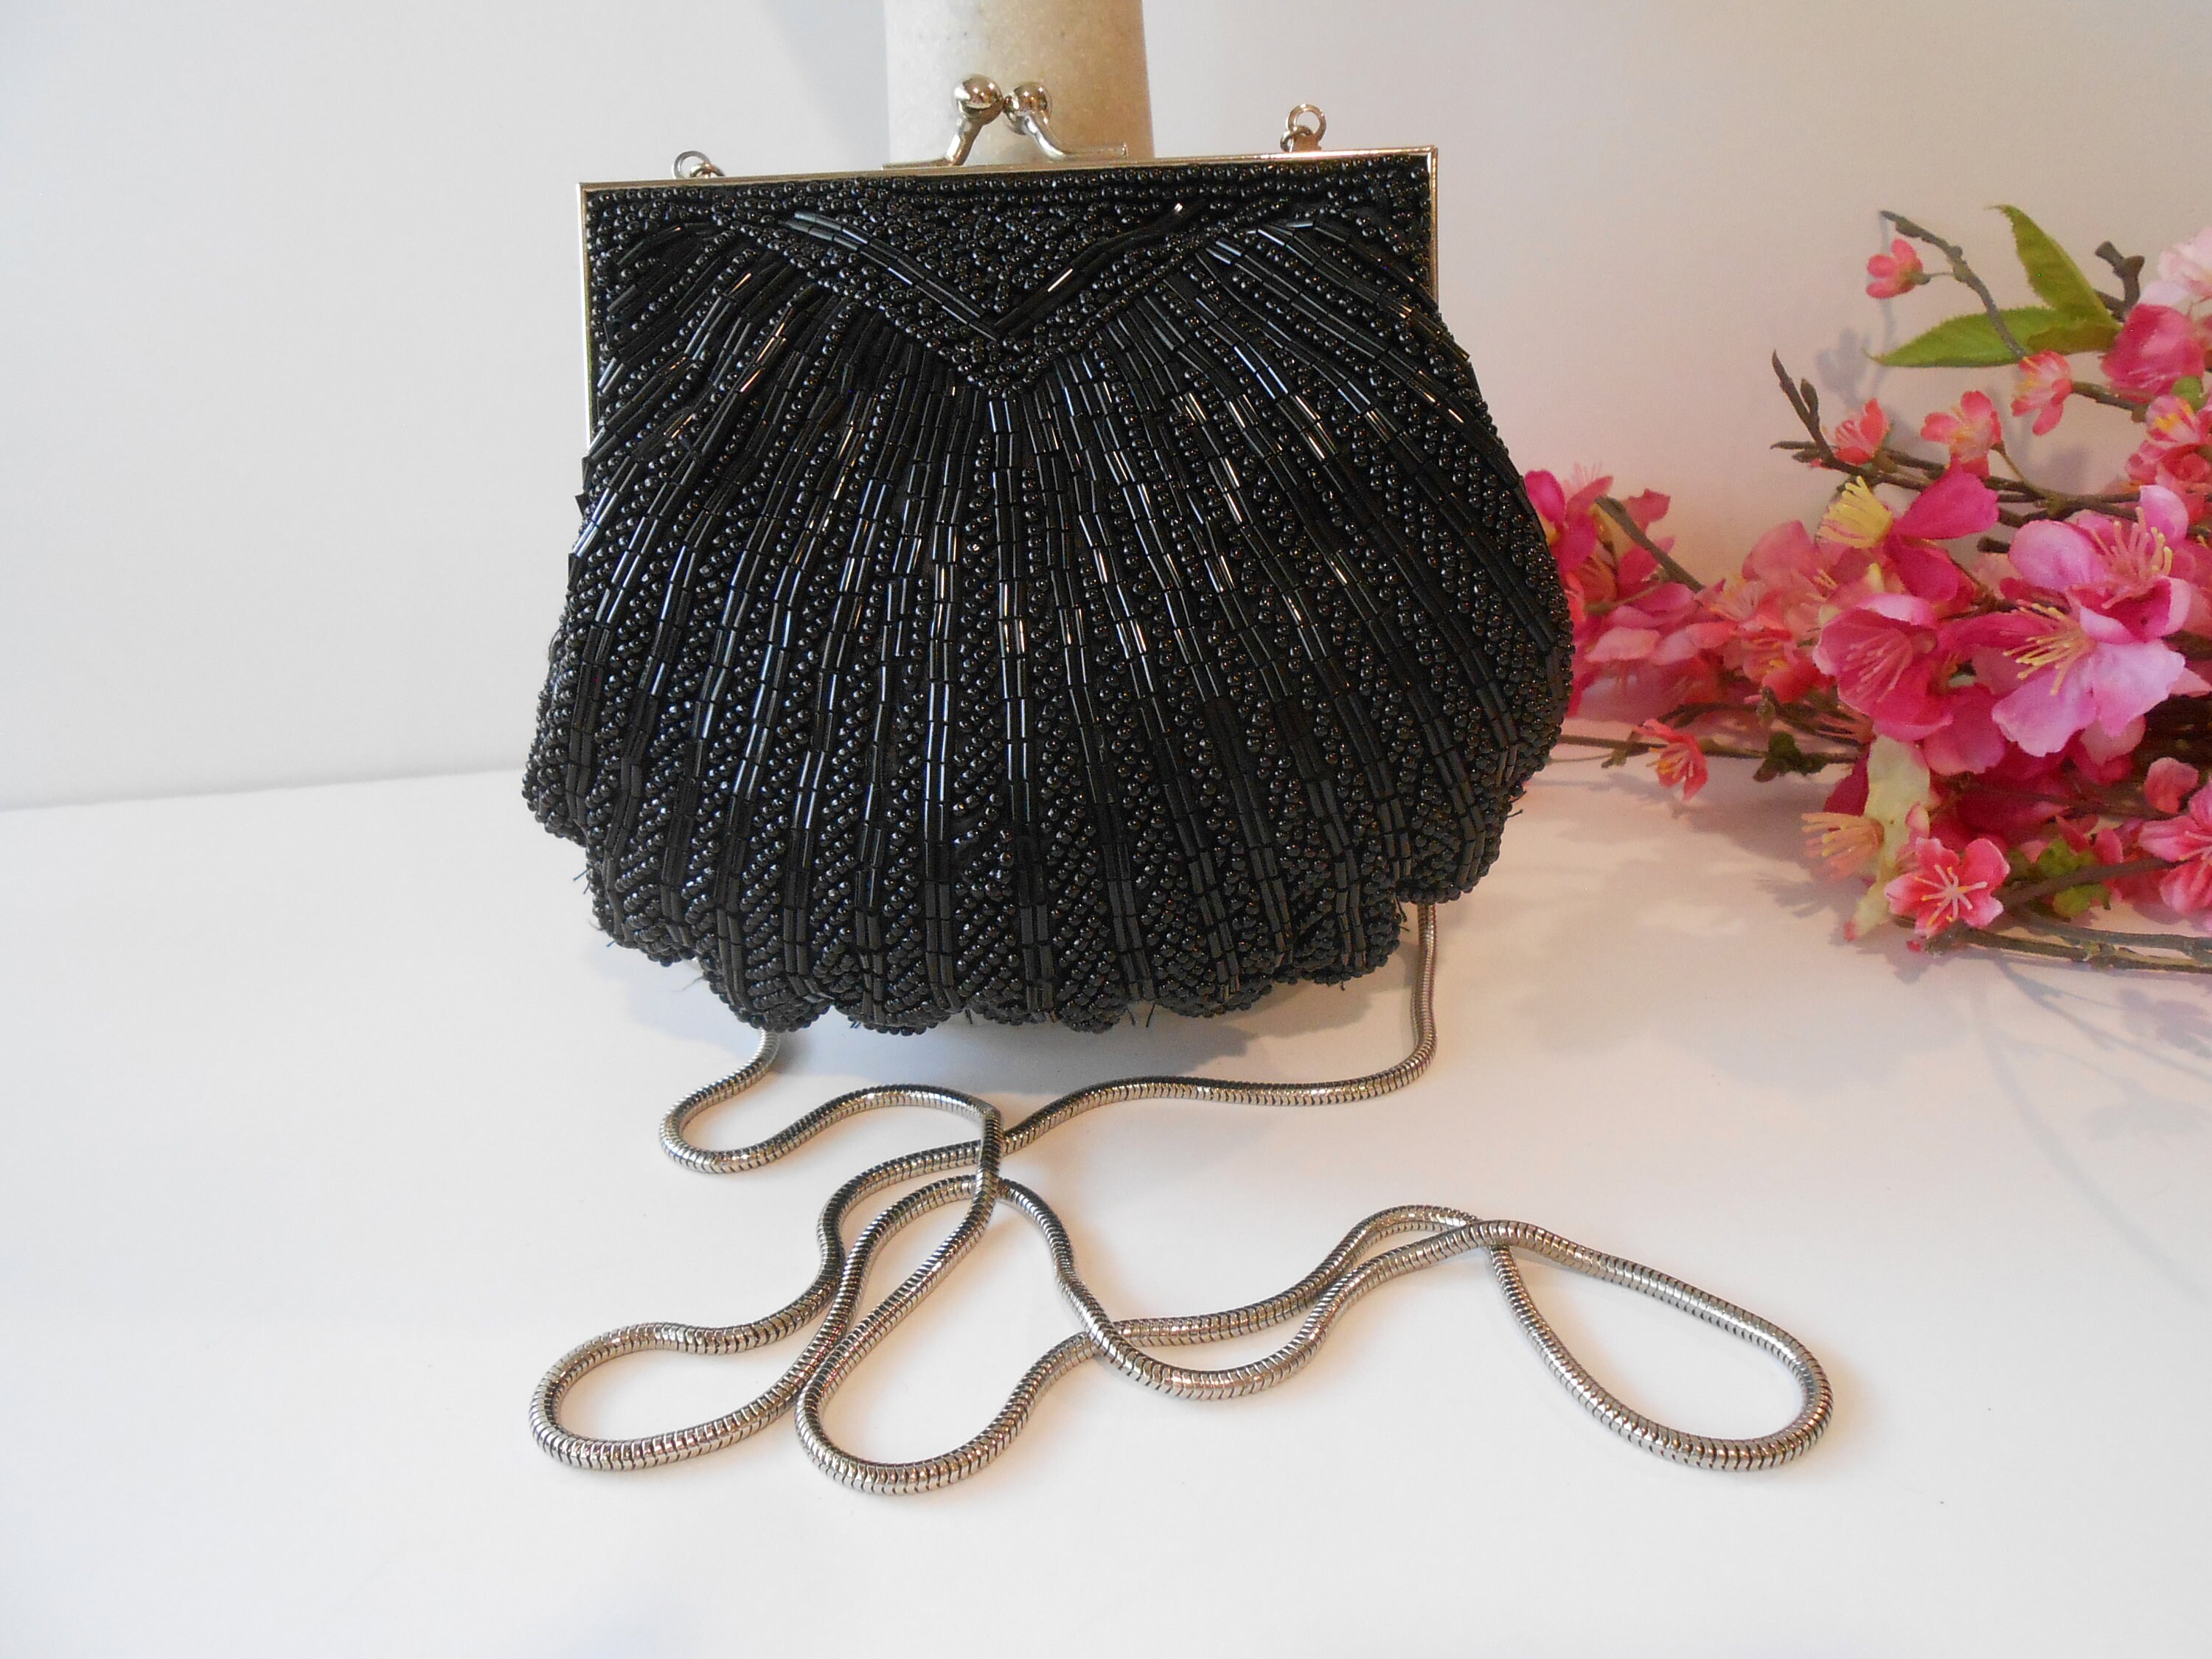 Vintage Beaded Evening Bag Purse Clam Shell Kiss Lock Clasp Gold